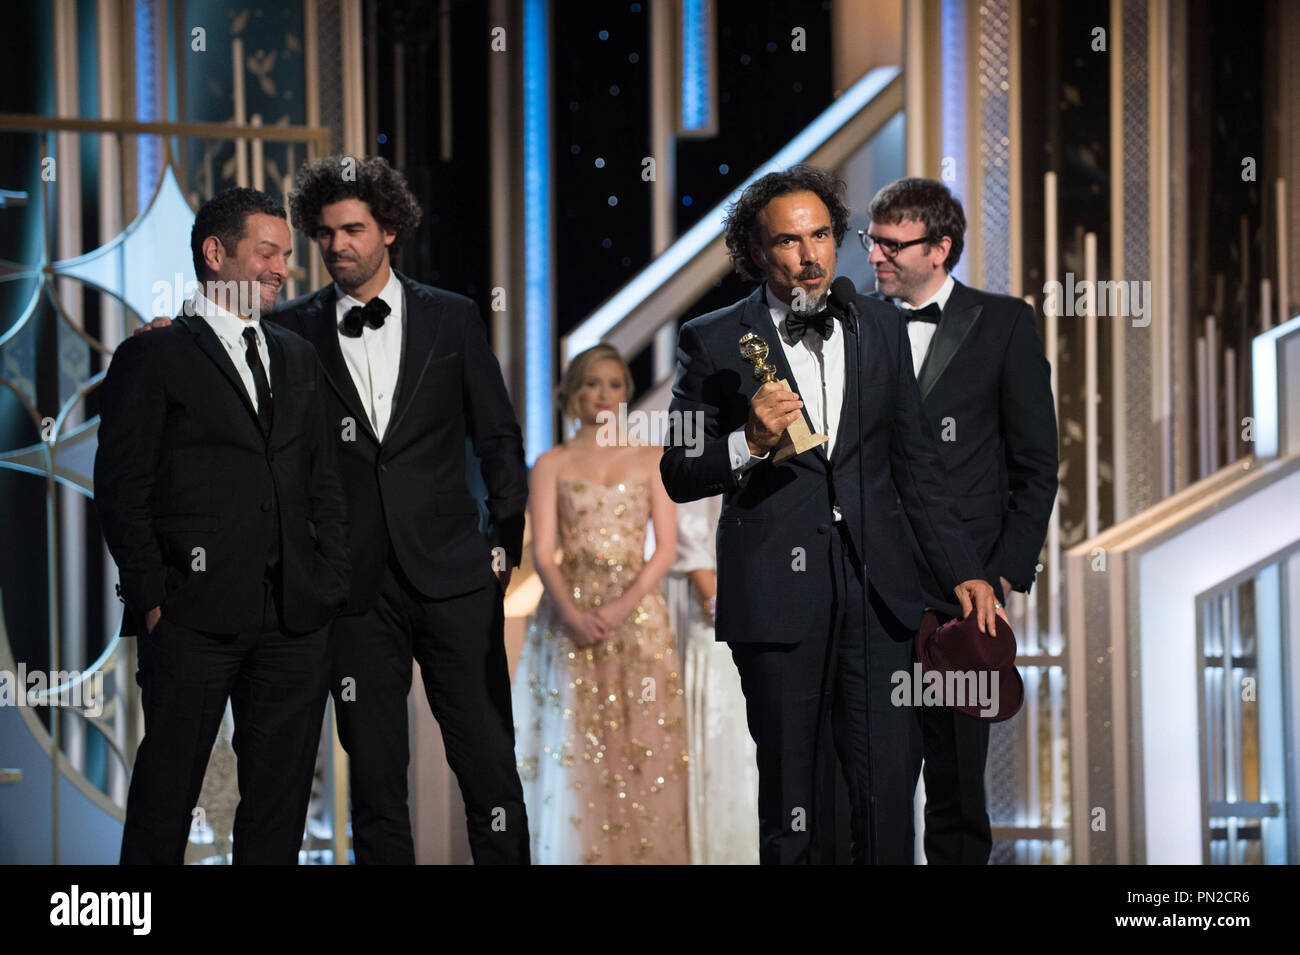 The Golden Globe is awarded to Alejandro González Iñárritu, Nicolás Giacobone, Alexander Dinelaris and Armando Bo for BEST SCREENPLAY – MOTION PICTURE for “BIRDMAN” at the 72nd Annual Golden Globe Awards at the Beverly Hotel in Beverly Hills, CA on Sunday, January 11, 2015.  File Reference # 32536 783JRC  For Editorial Use Only -  All Rights Reserved Stock Photo